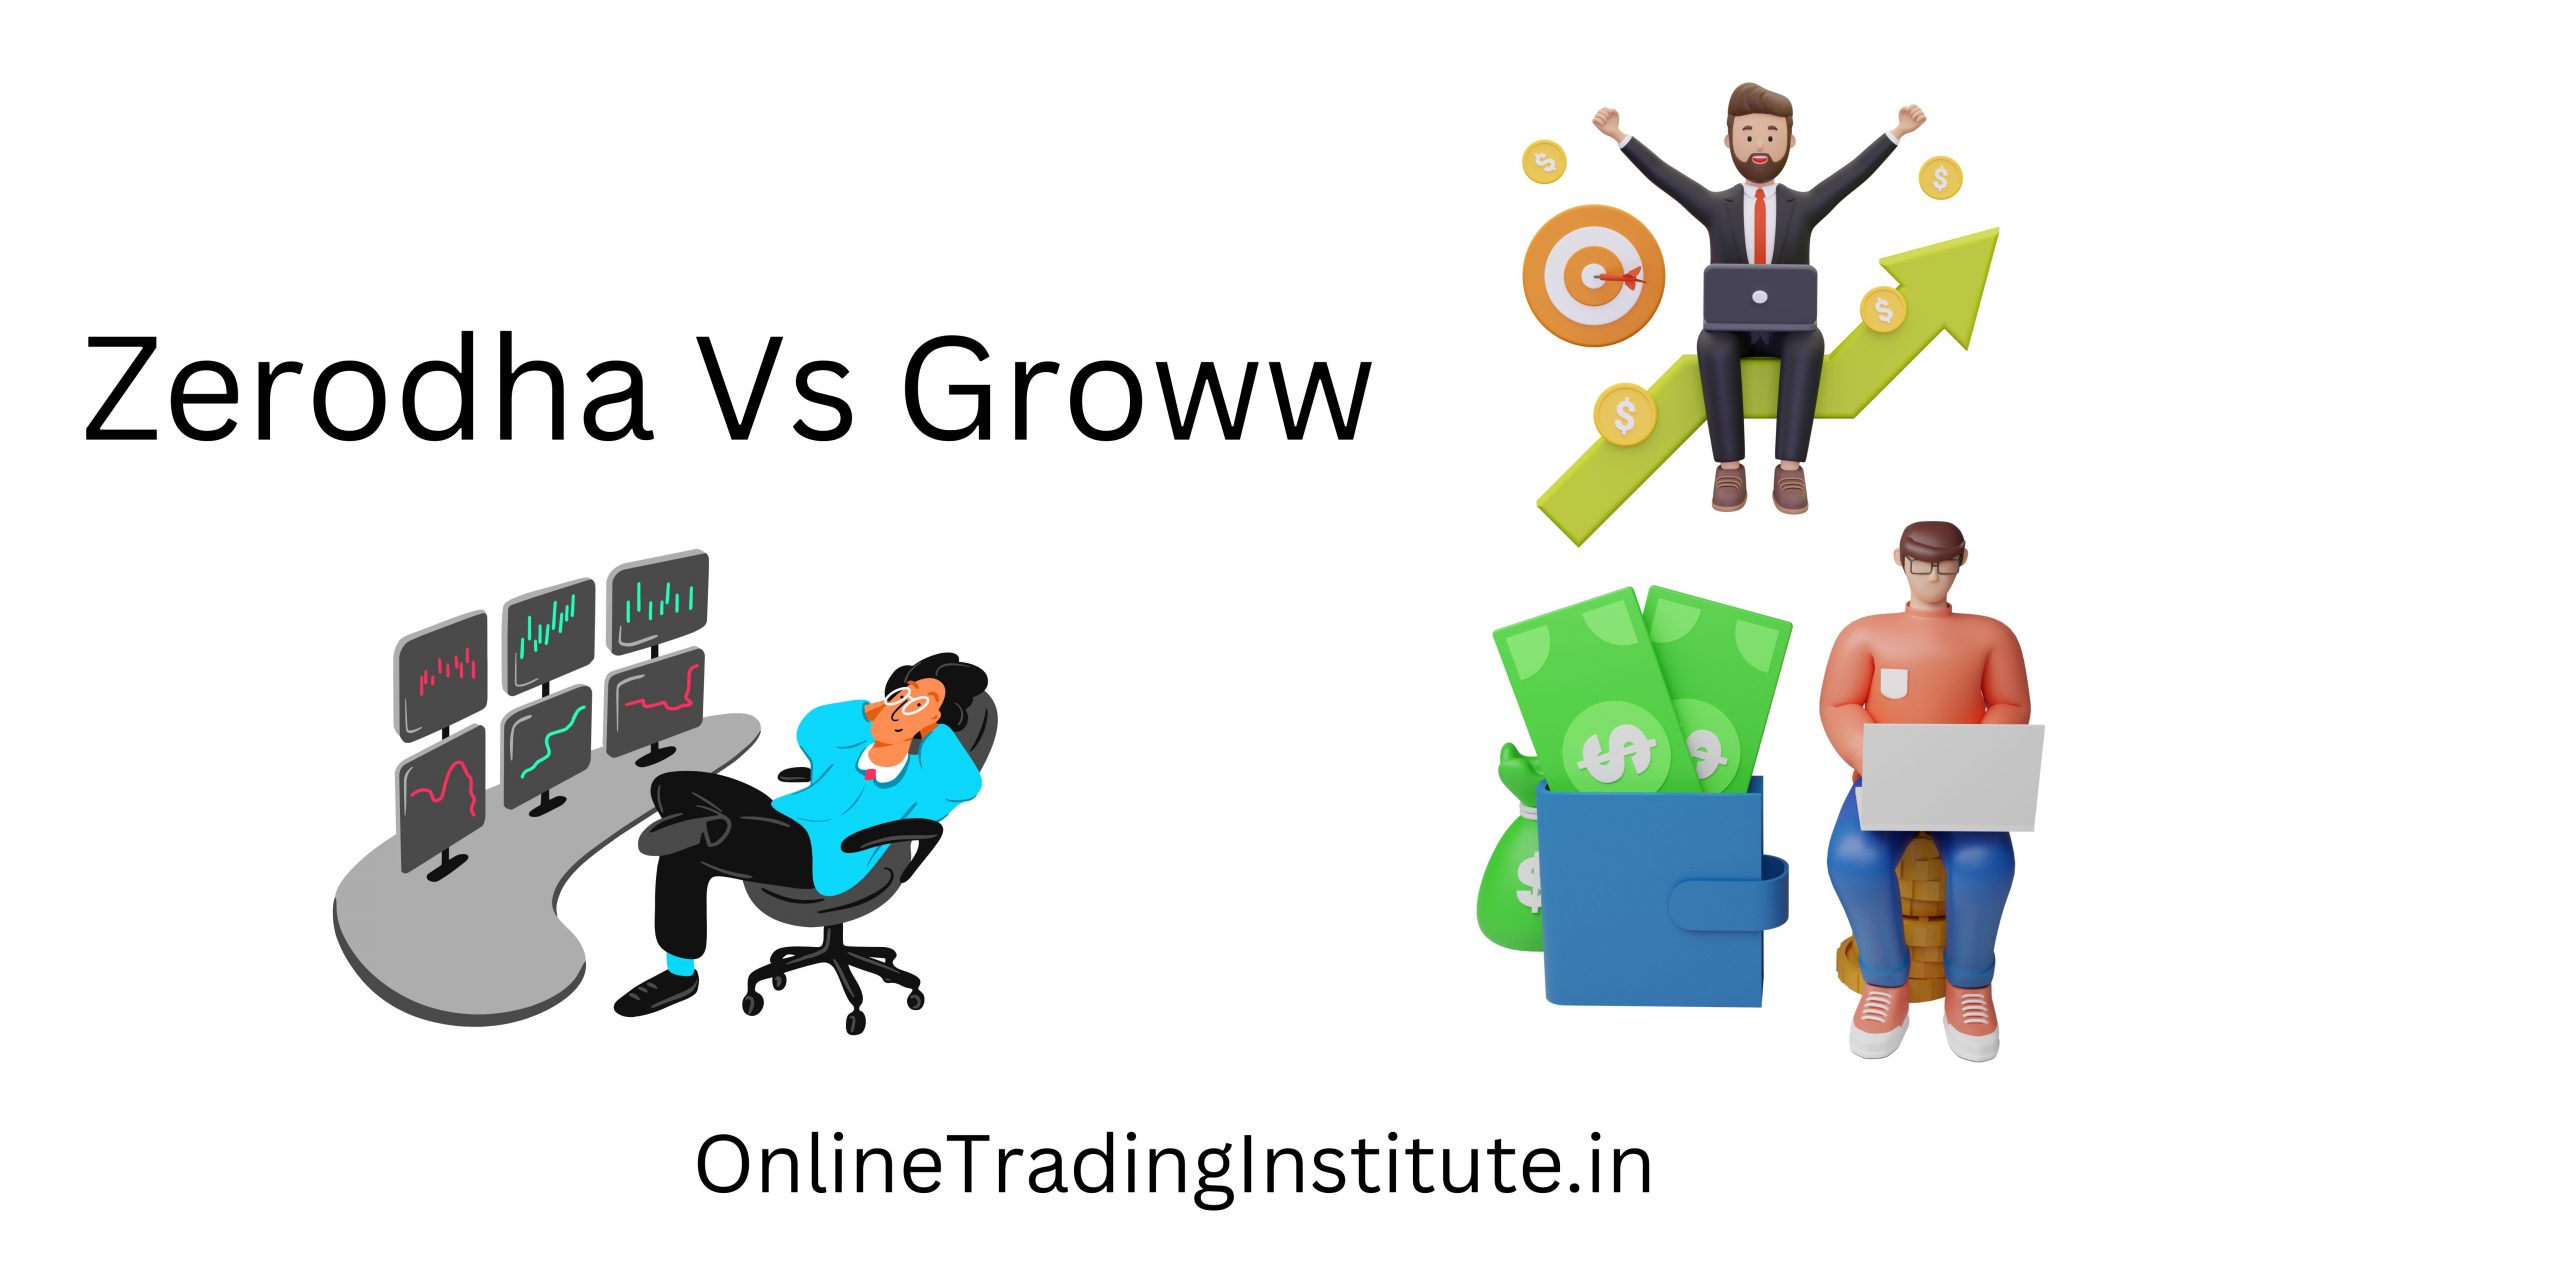  Zerodha or Groww- Confused? Here is everything you need to know!